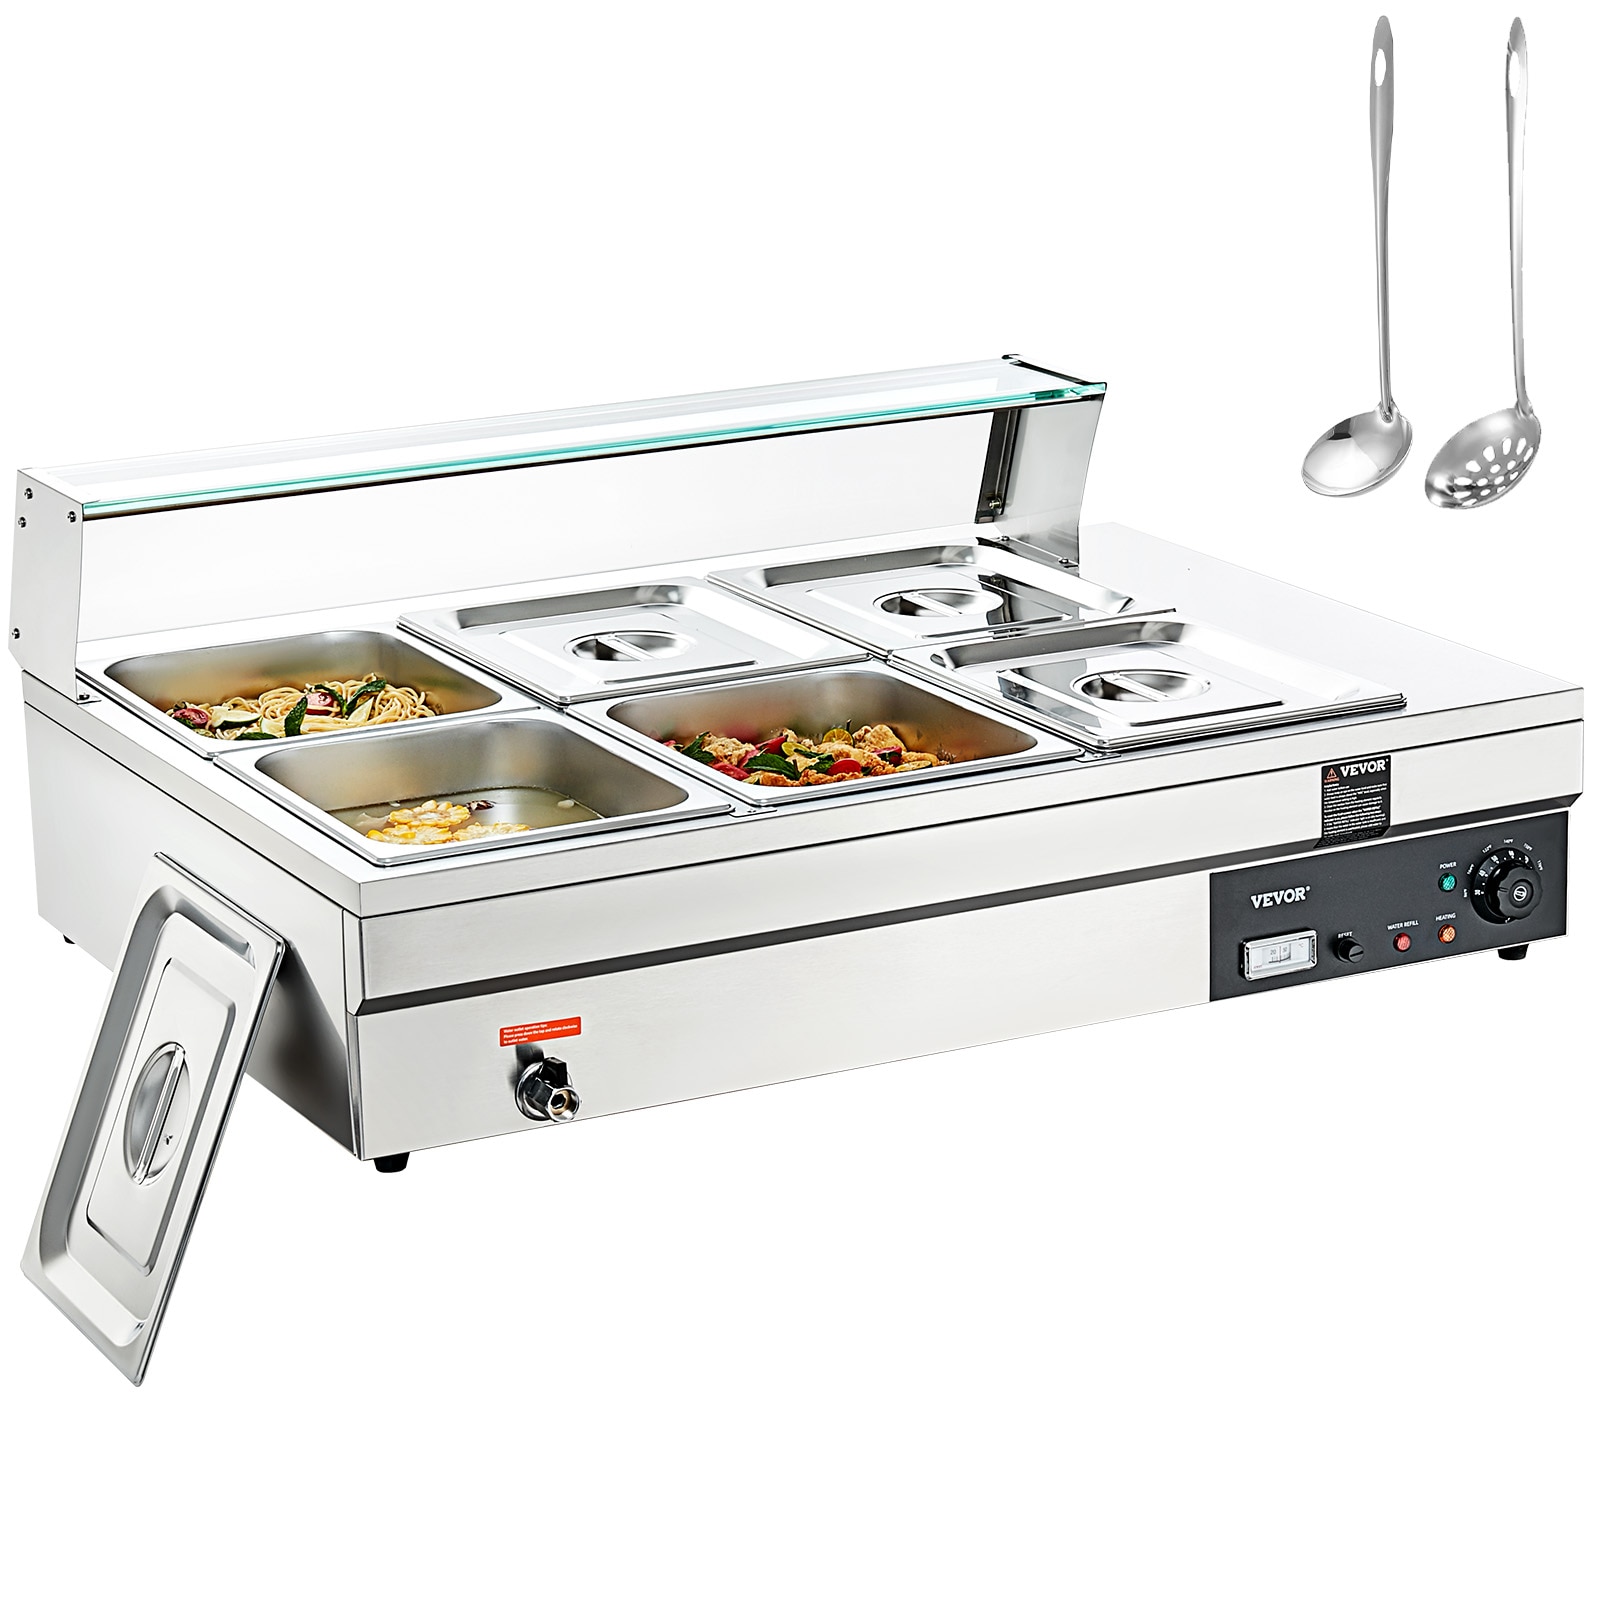  Proctor Silex Buffet Server & Food Warmer, Adjustable Heat, for  Parties, Holidays and Entertaining, Three 2.5 Quart Oven-Safe Chafing Dish  Set, Stainless Steel: Home & Kitchen